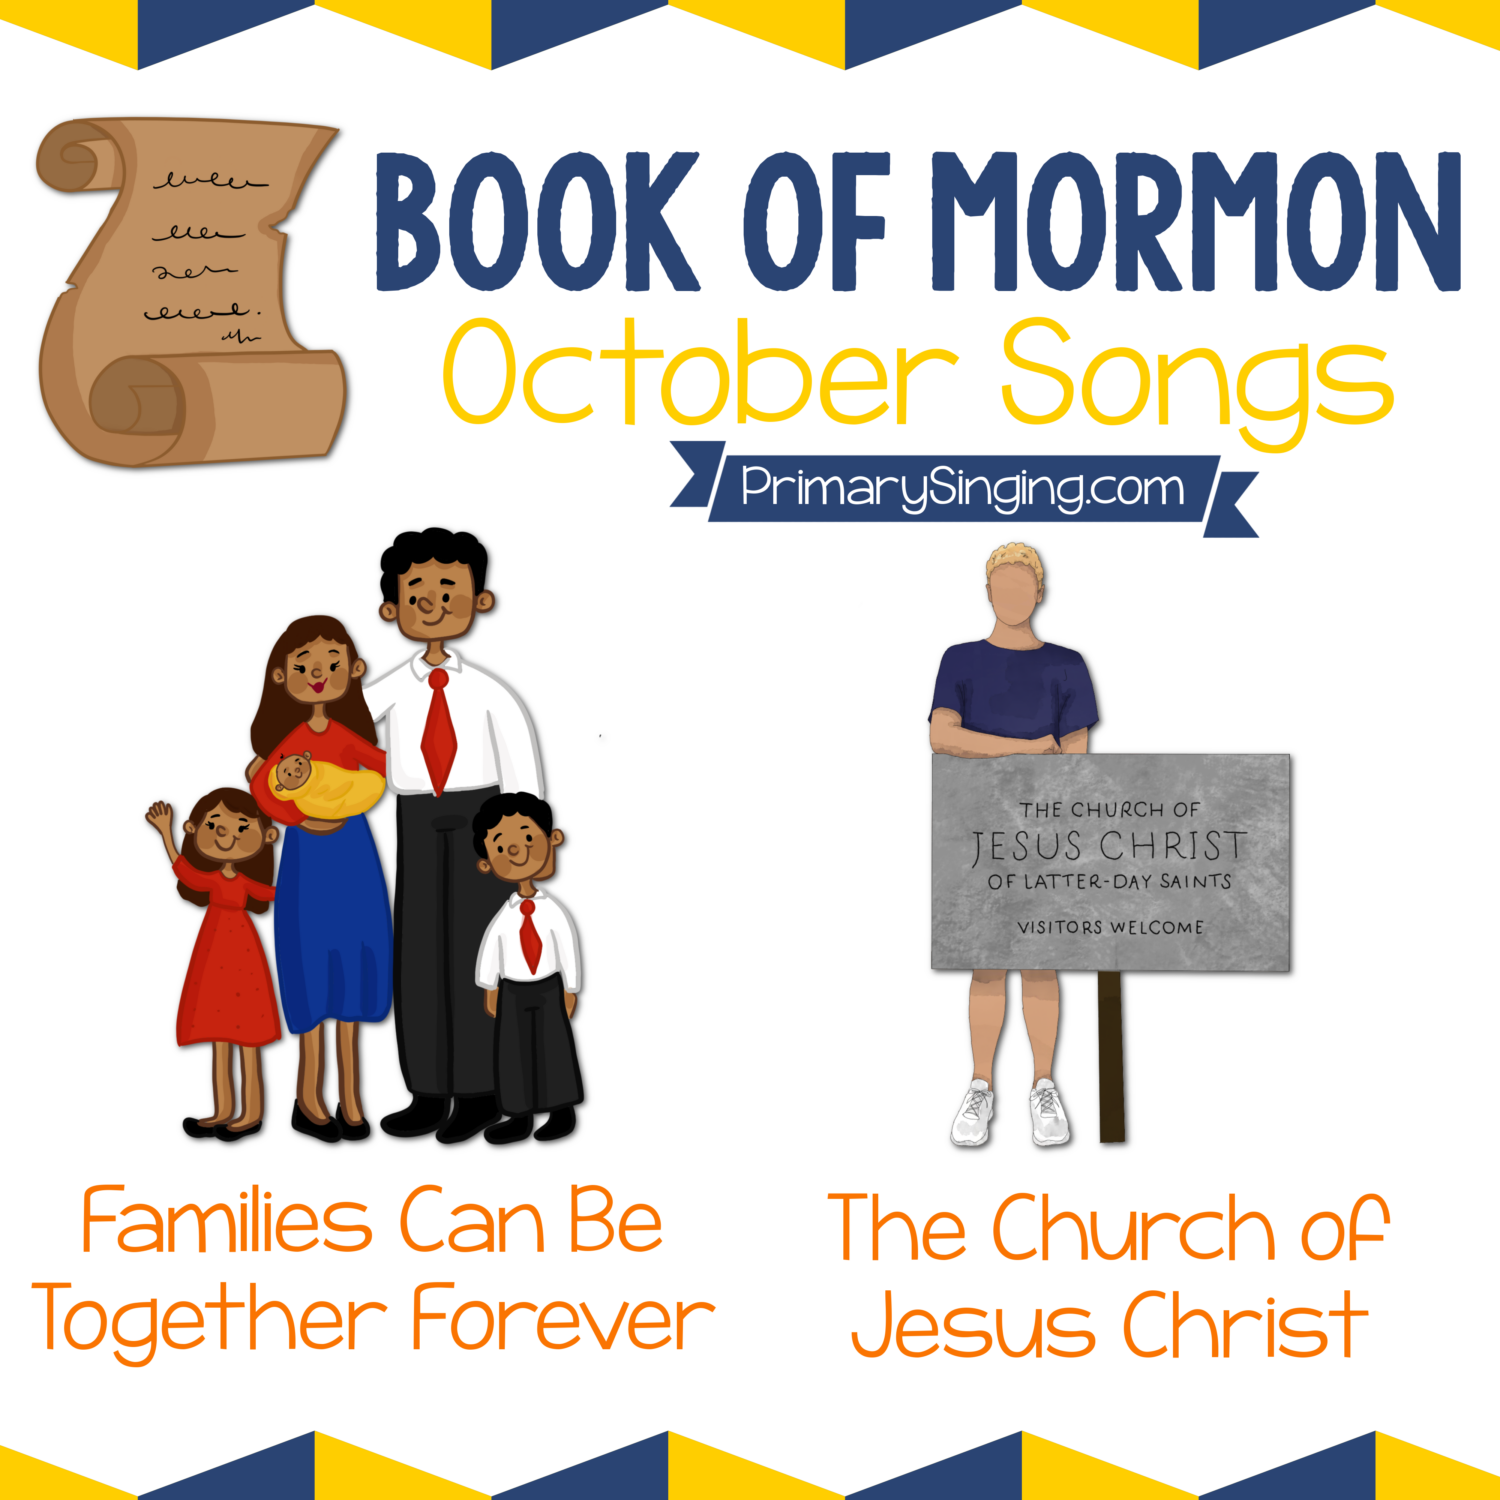 Book of Mormon October Song List - Families Can Be Together Forever and The Church of Jesus Christ. Teach these 2 great Primary songs during Singing Time or home Come Follow Me lessons.Book of Mormon October Song List - Families Can Be Together Forever and The Church of Jesus Christ. Teach these 2 great Primary songs during Singing Time or home Come Follow Me lessons.